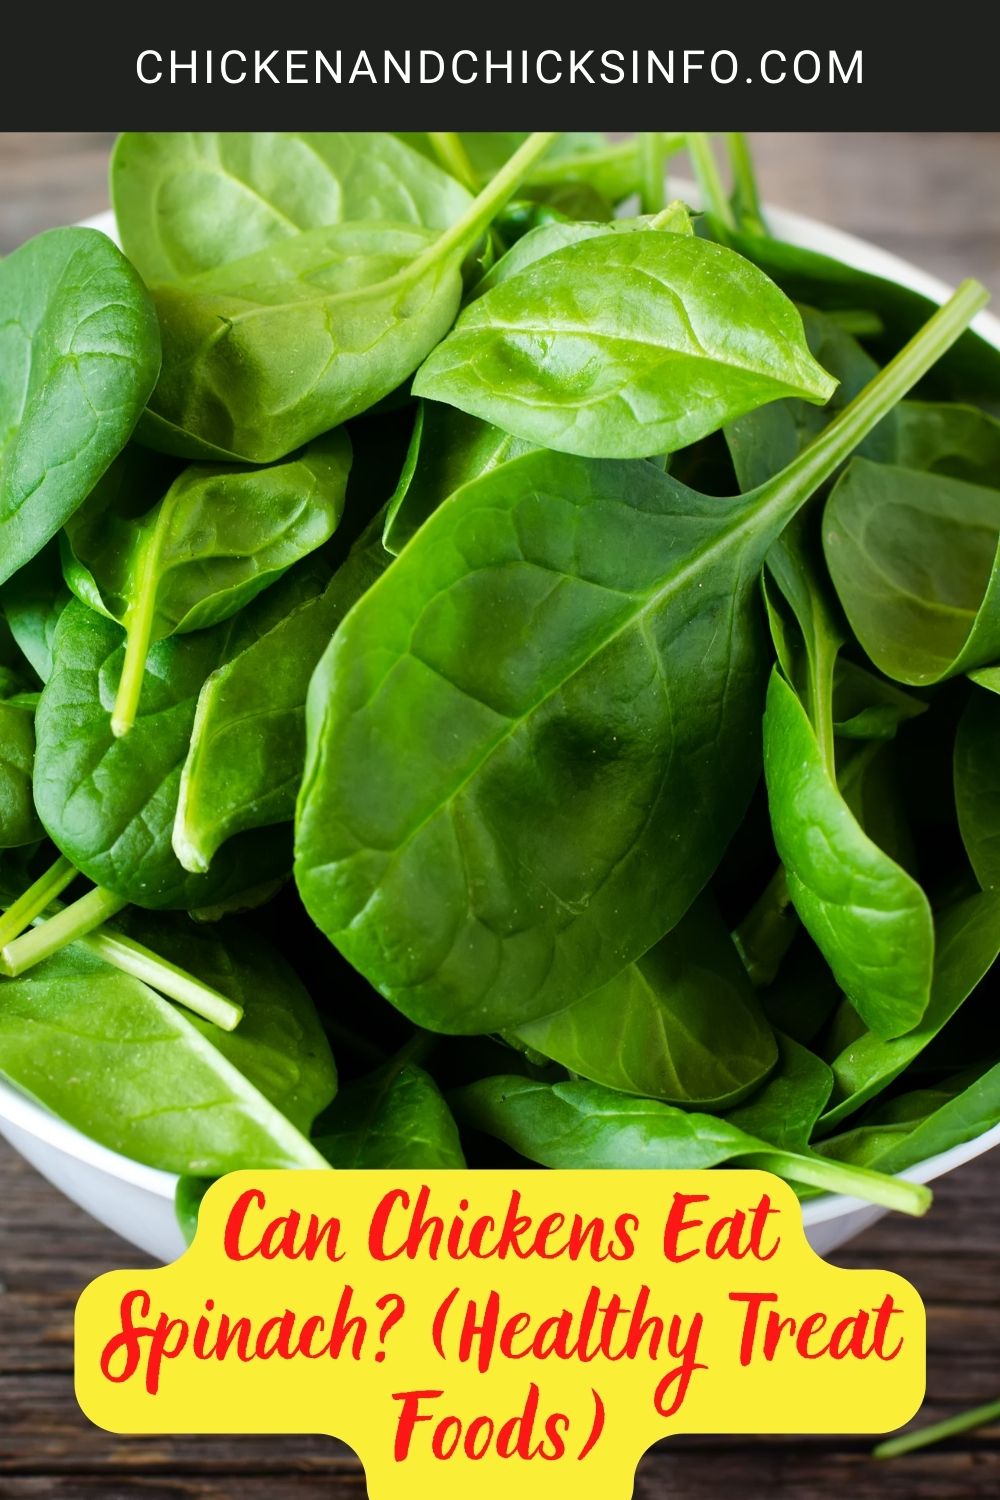 Can Chickens Eat Spinach? (Healthy Treat Foods) poster.
